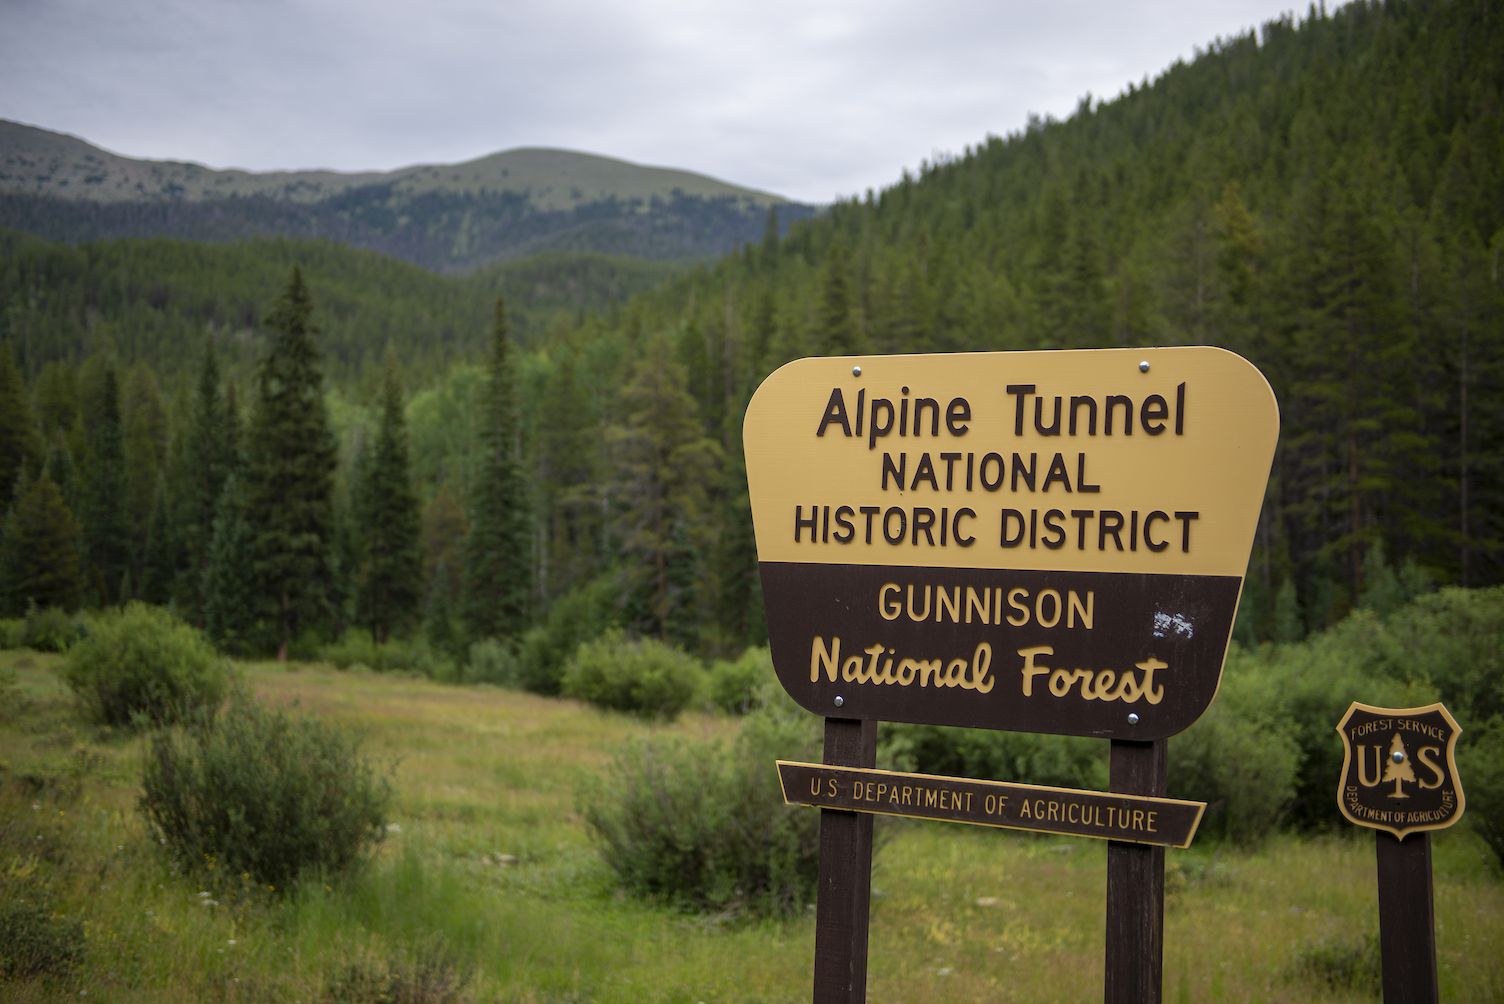 A sign that says "Alpine Tunnel Historic District"